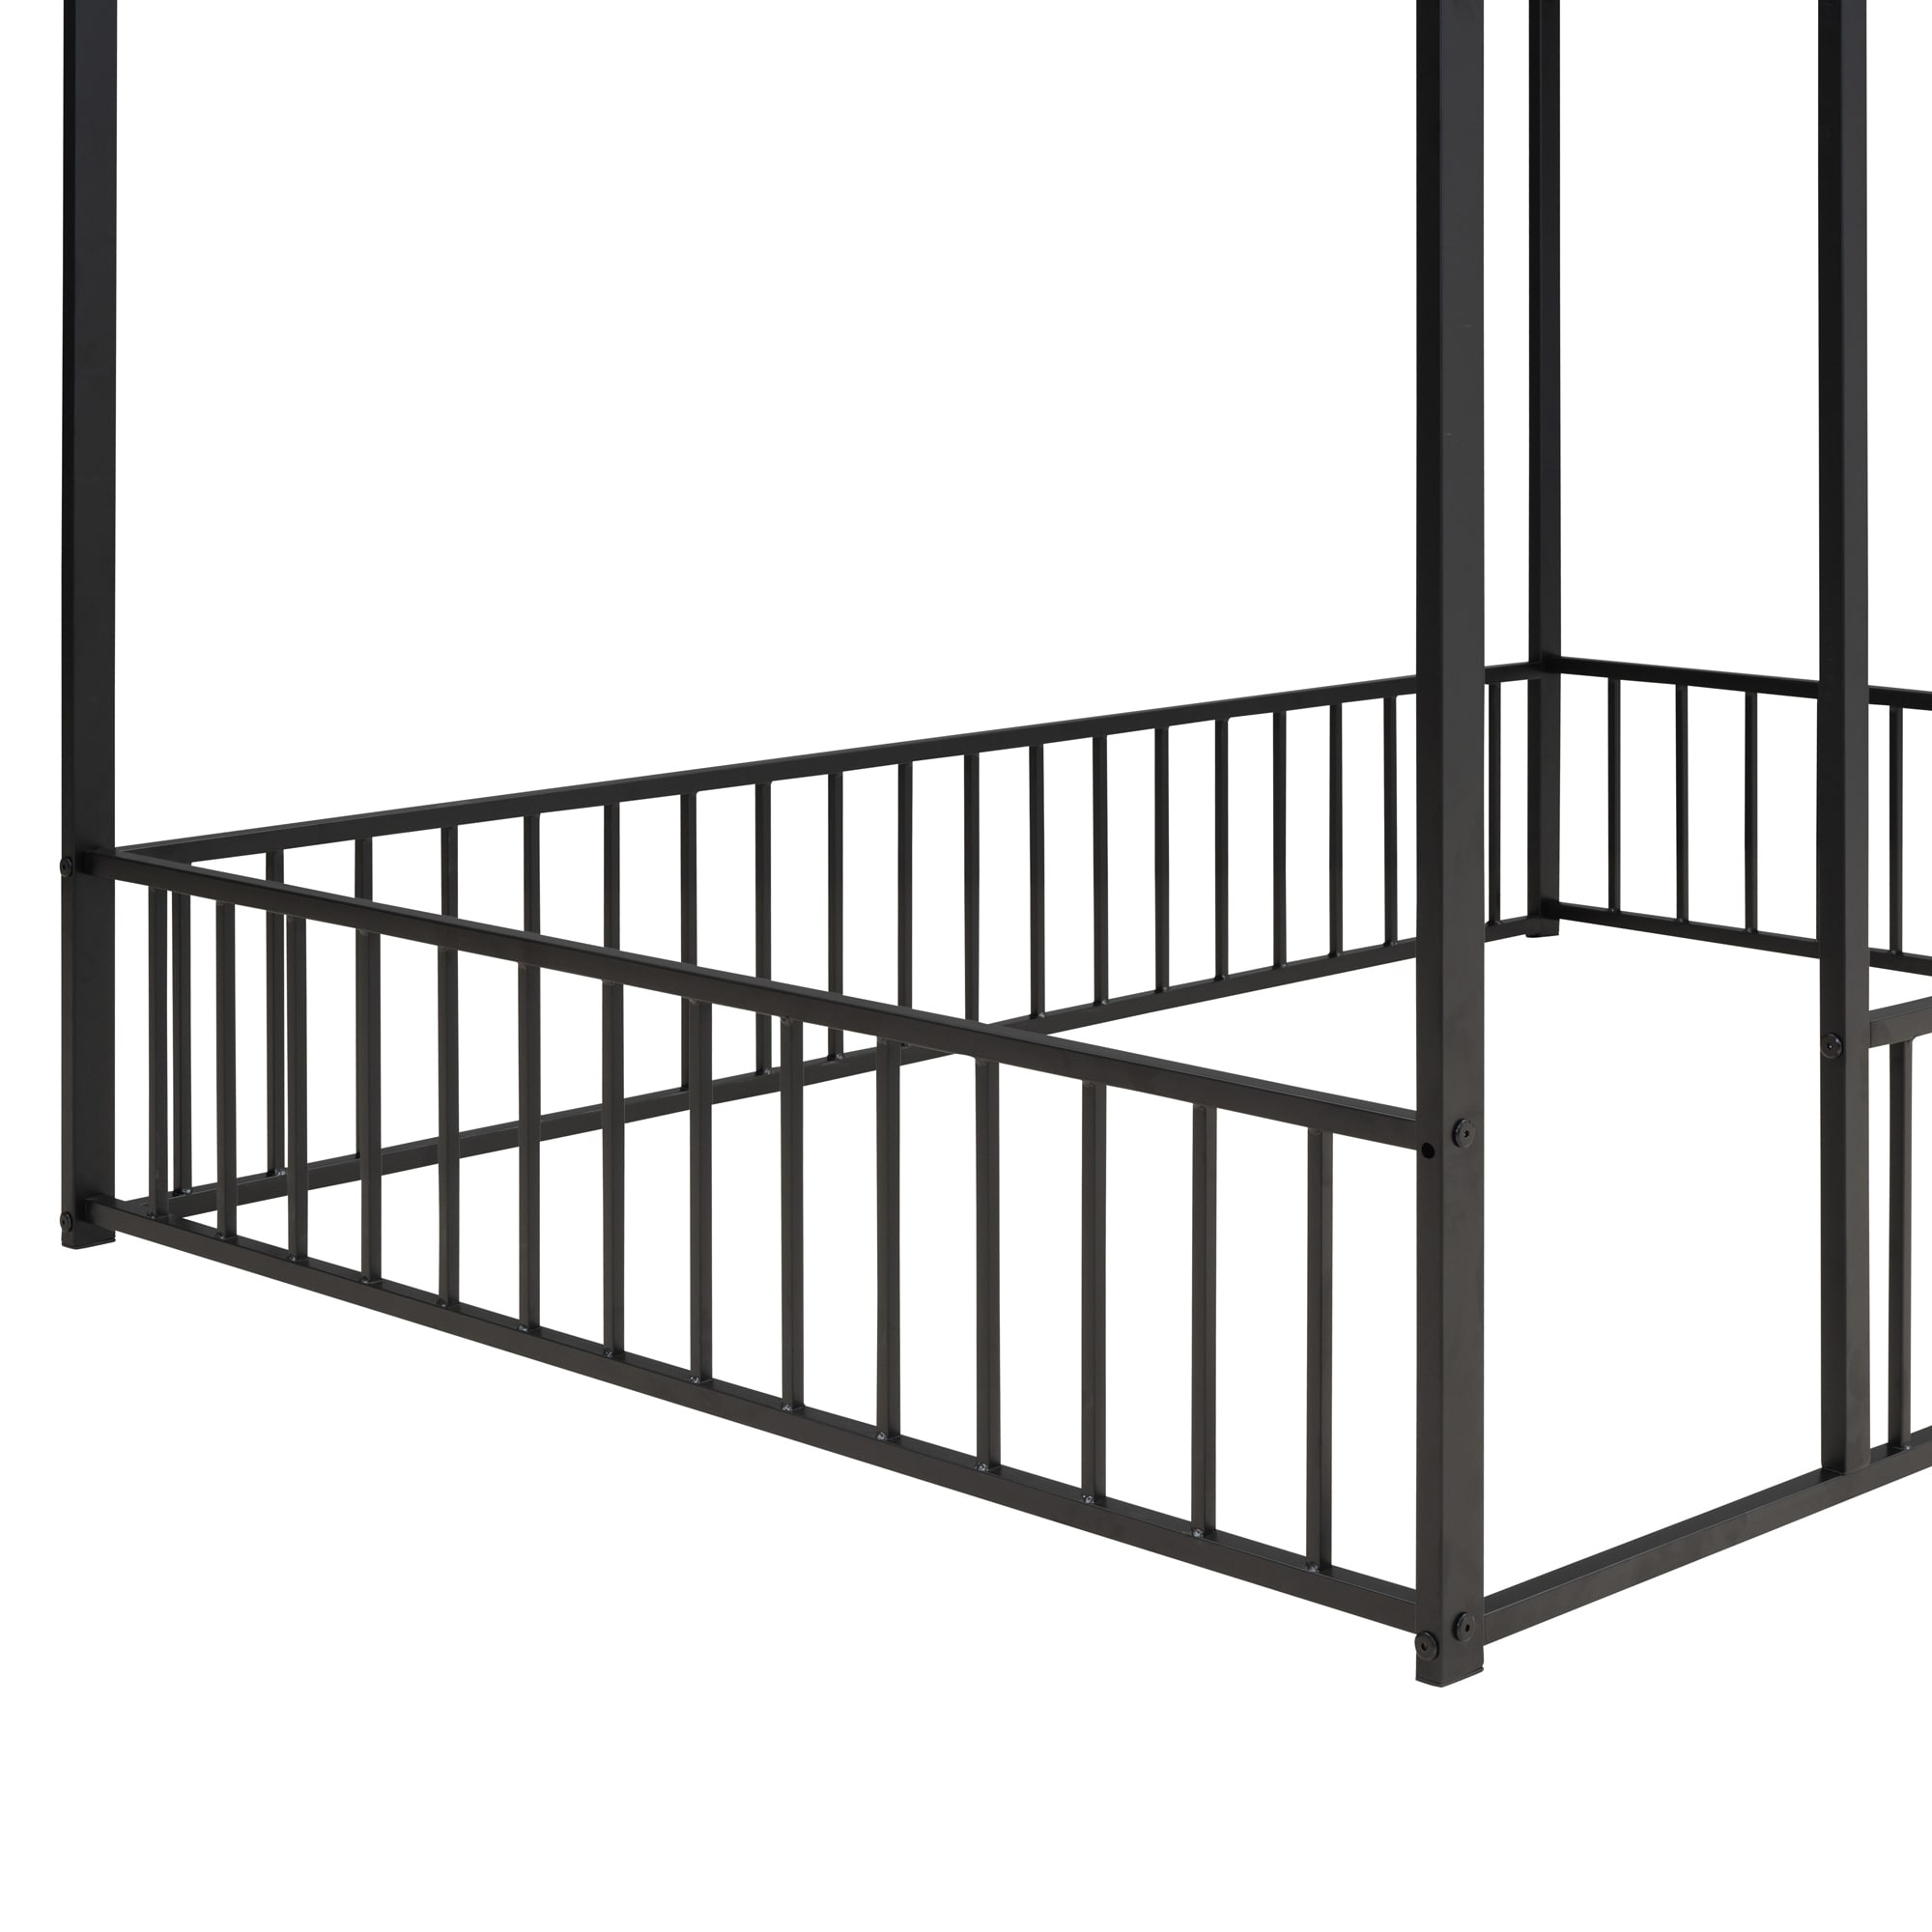 Modern Full Size Metal Bed House Bed Frame, No Limit Weight Capacity with Roof & Safety Guard Fence House Beds for Kids, Teens